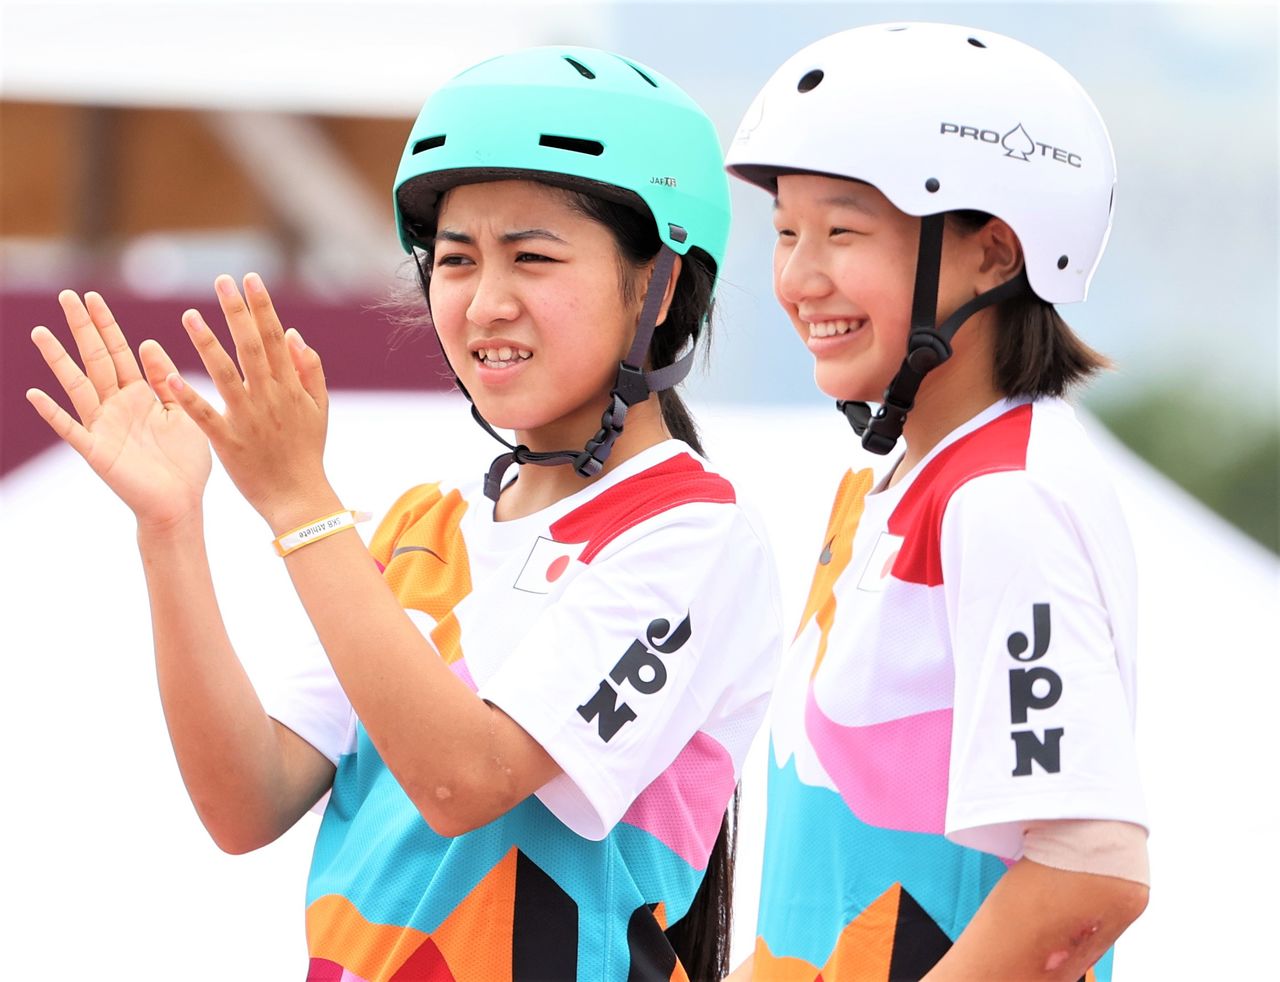 Nishiya (right) and Nakayama chatting during a break in the finals at Tokyo’s Ariake Urban Sports Park on July 26, 2021. It was later revealed that they were discussing Rascal the Raccoon, which led to renewed interest in the 1970s anime character. (© Jiji)